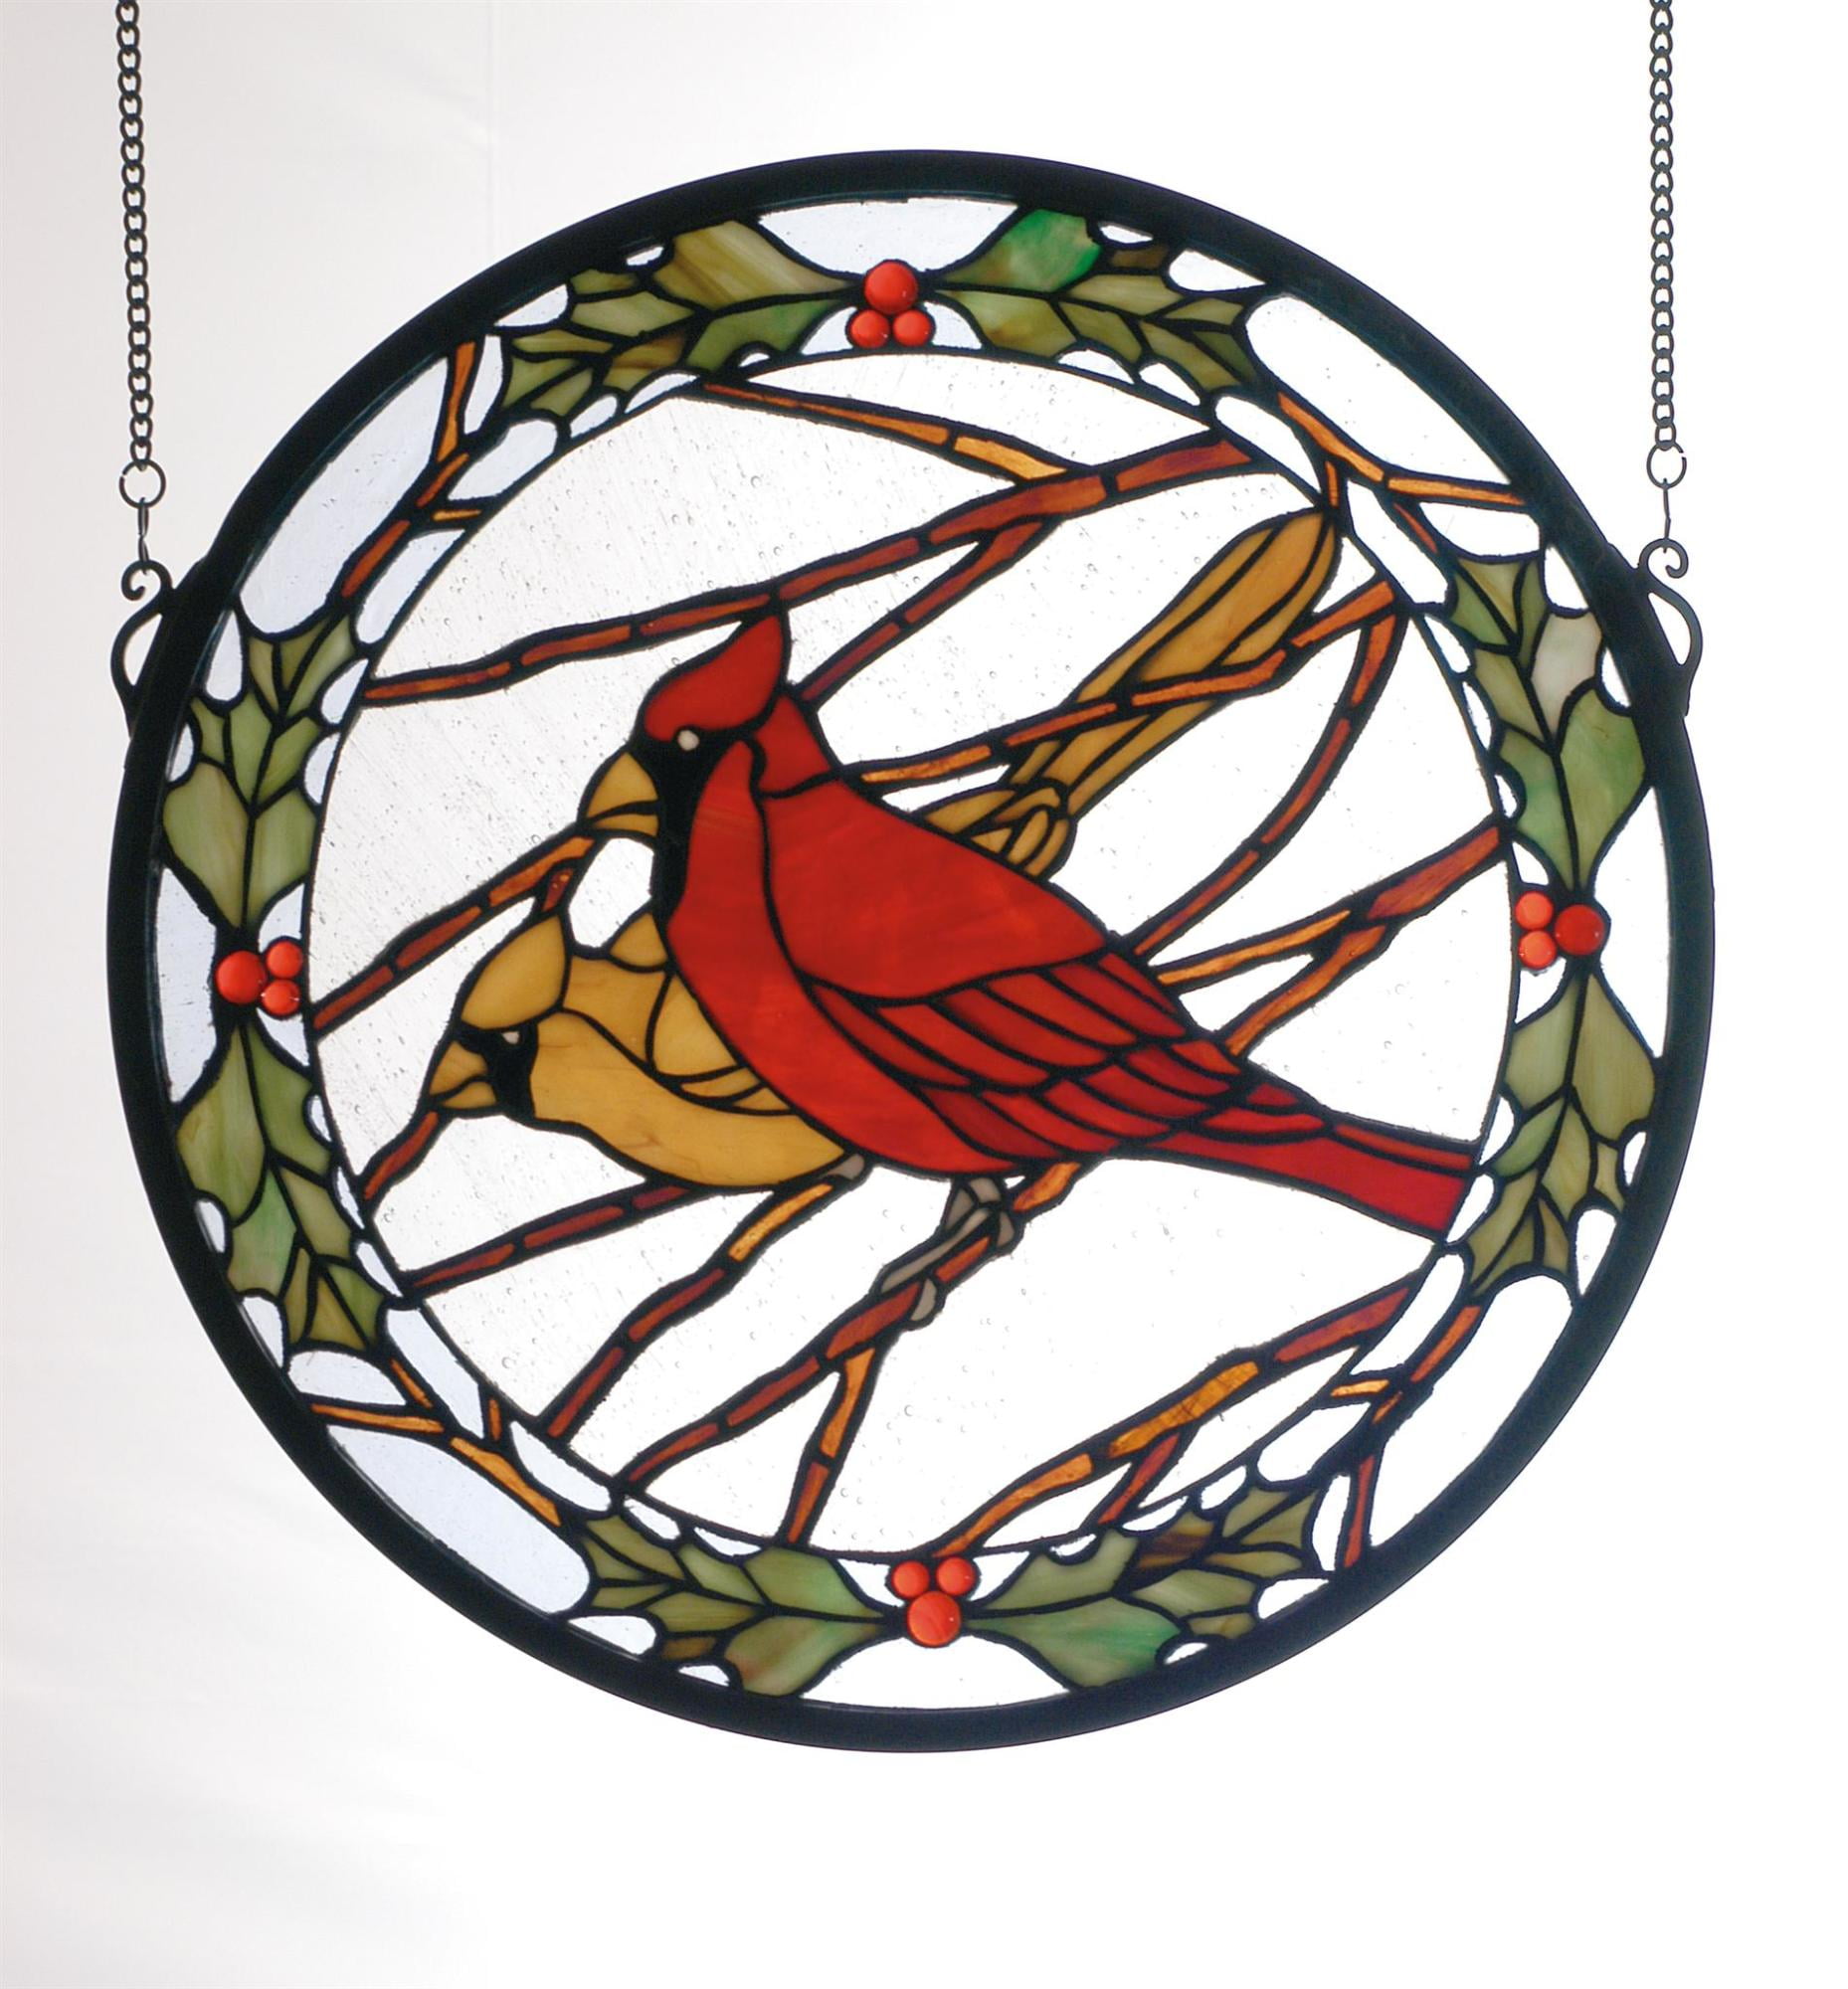 15"W X 15"H Cardinals & Holly Stained Glass Window